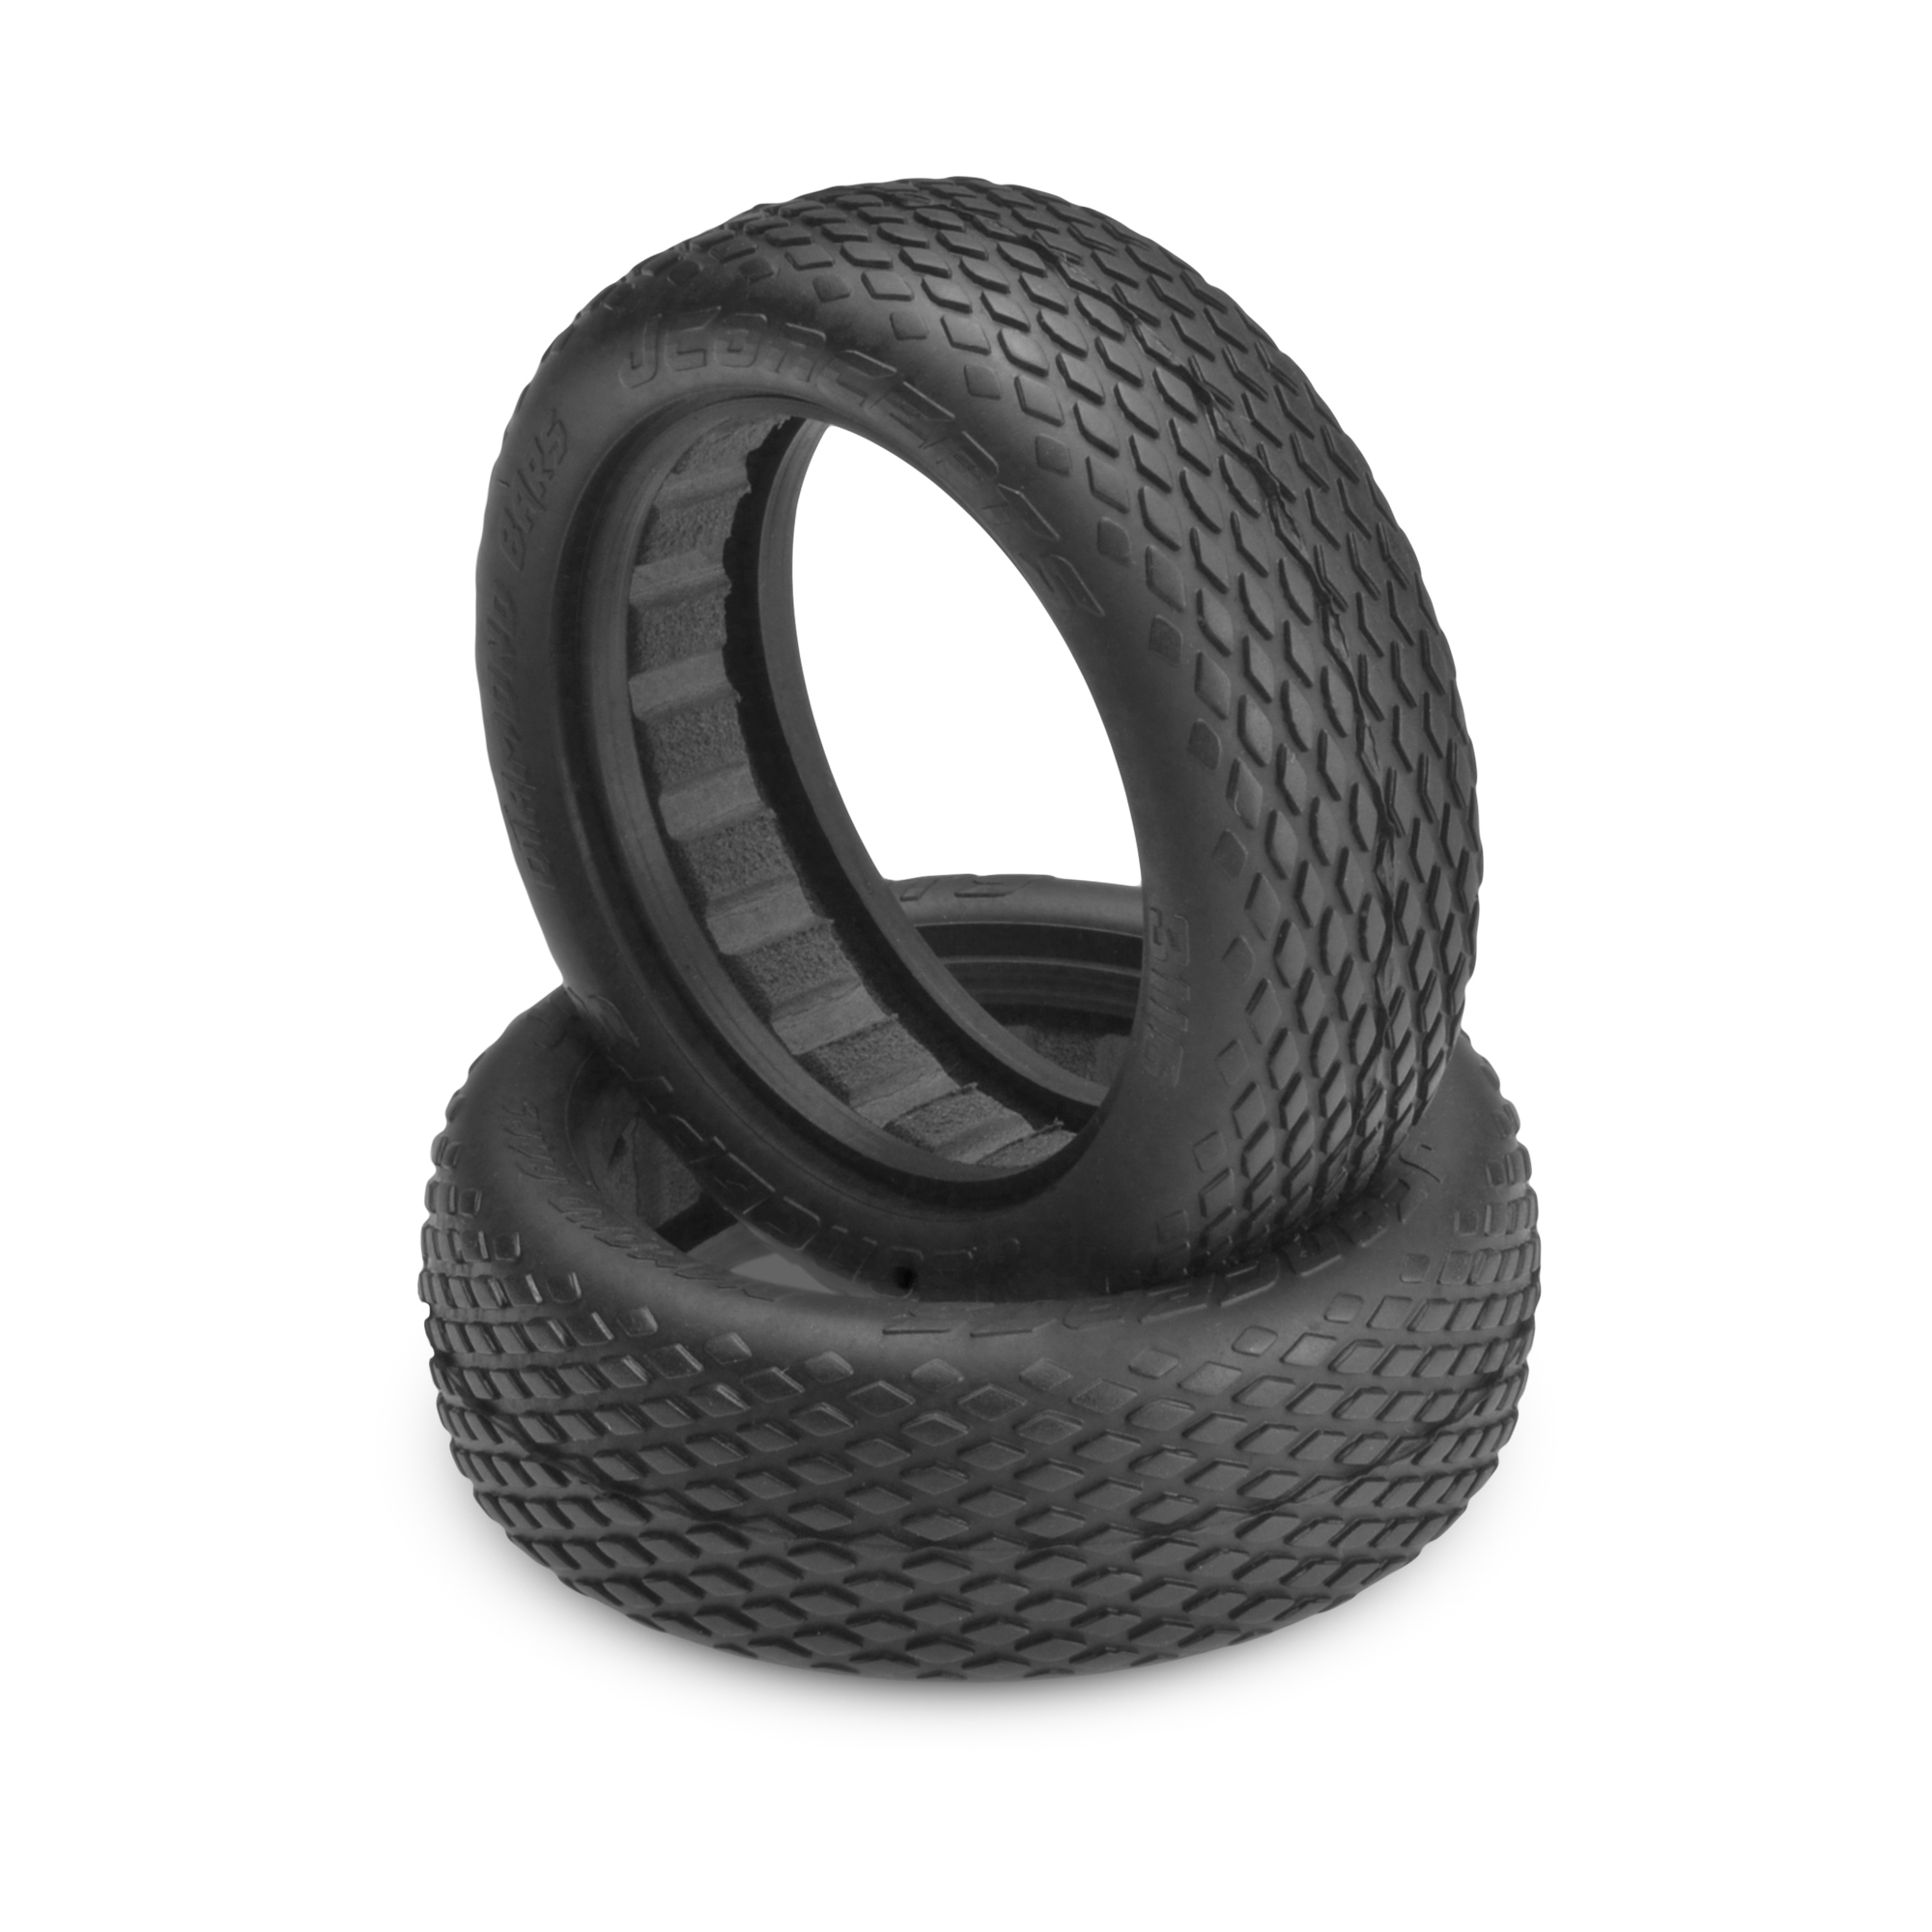 Green Compound JConcepts 3116-02 Diamond Bars 2.2/" 2WD Front Buggy Tire 2